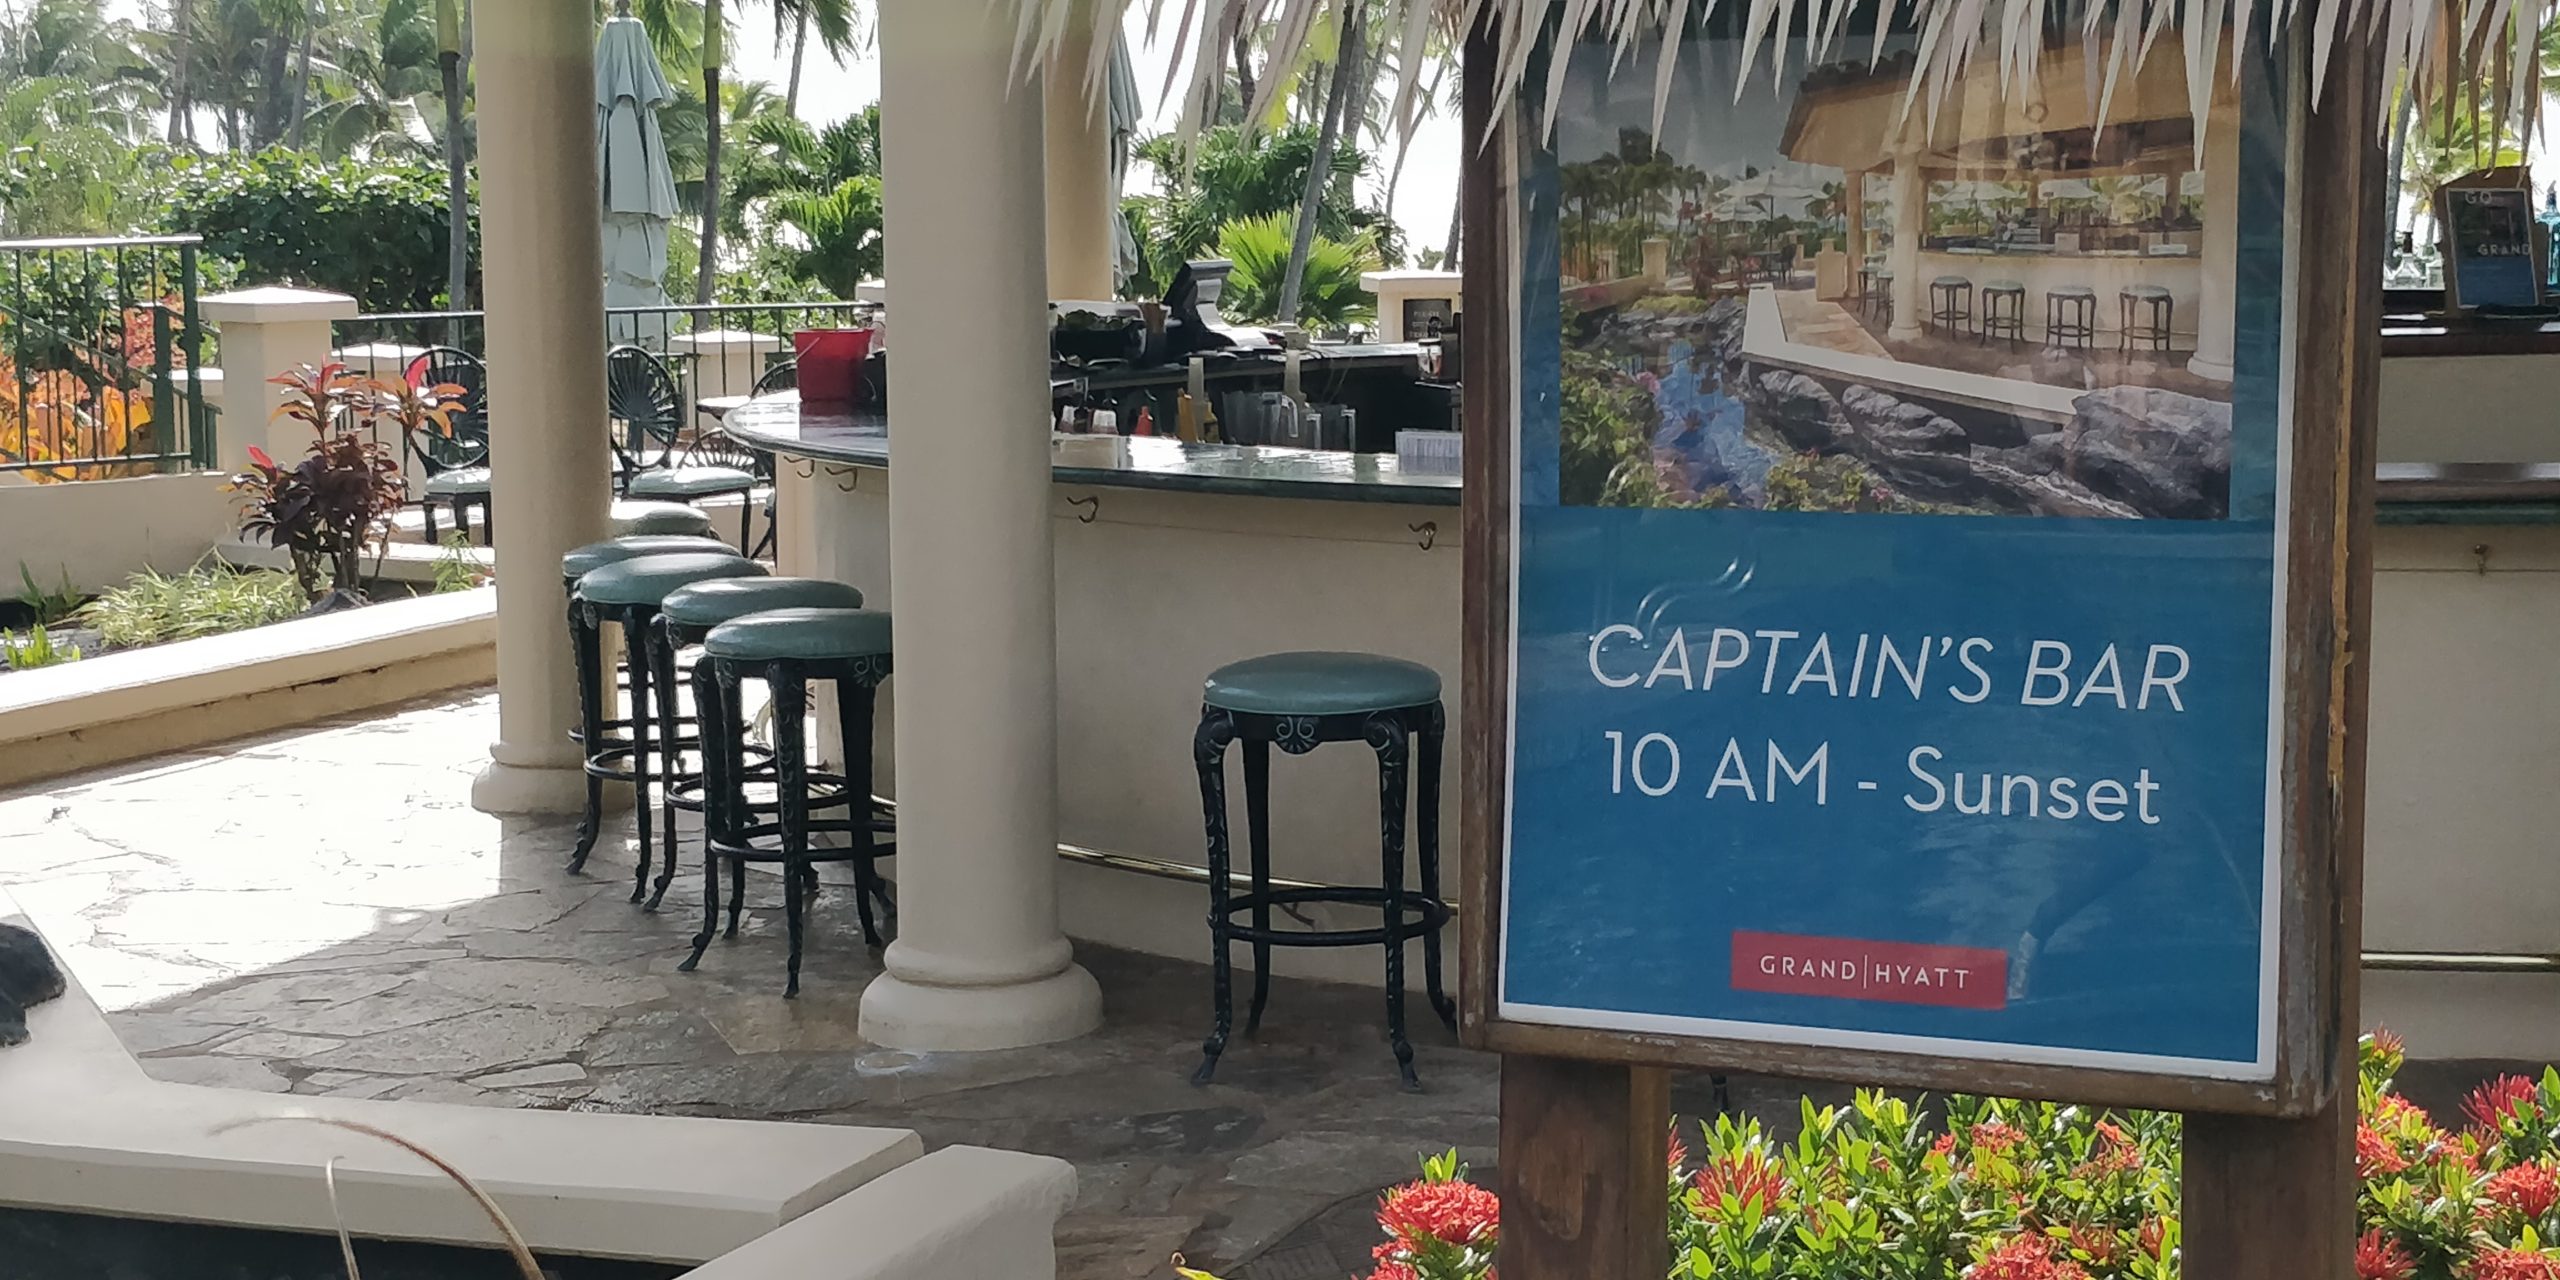 A PICTURE OF THE CAPTAIN'S BAR OVERLOOKING THE POOLS